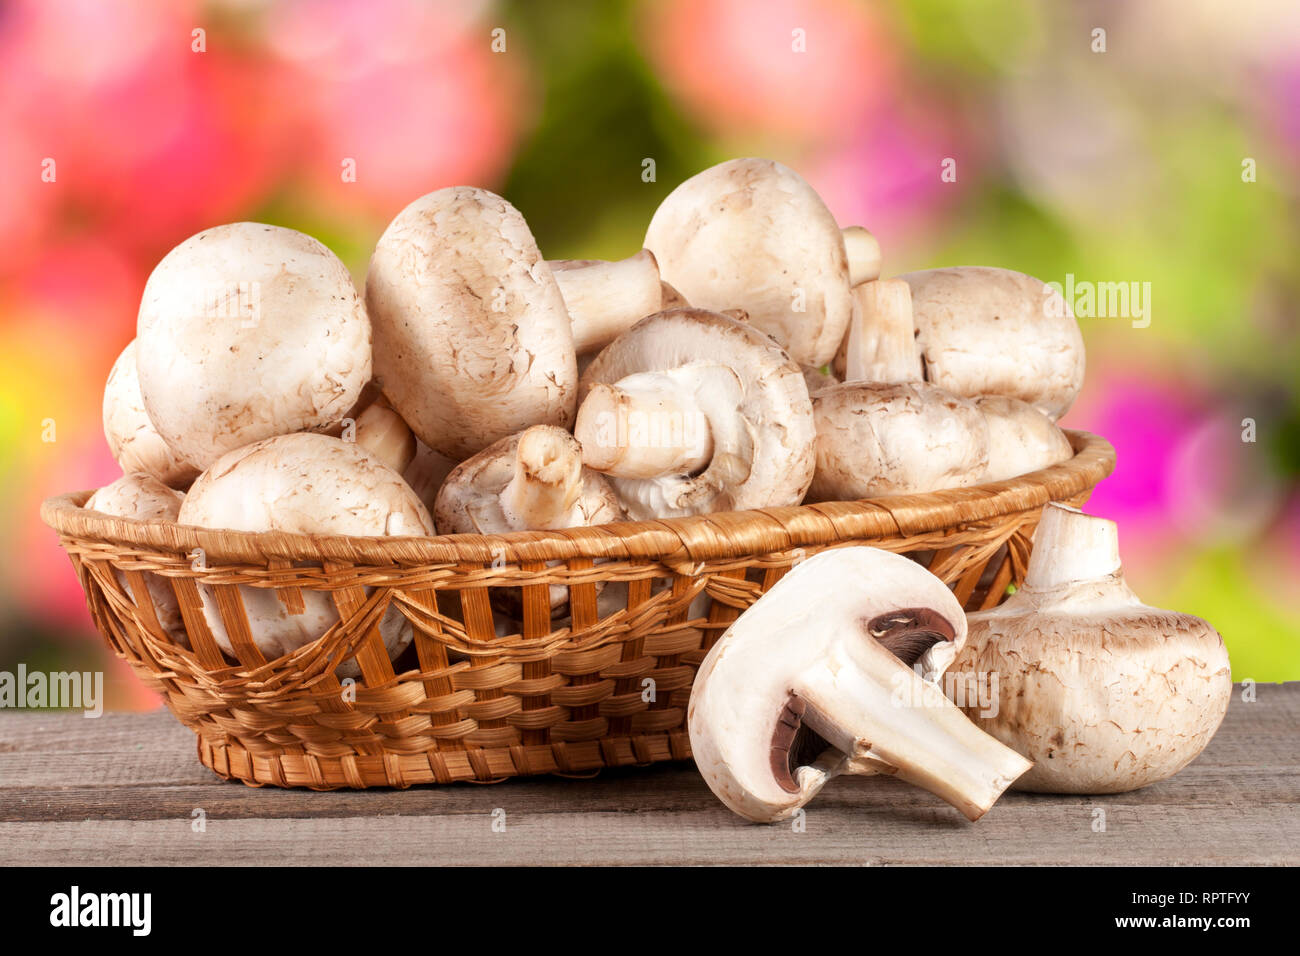 Champignon Mushrooms In A Wicker Basket On Wooden Table With